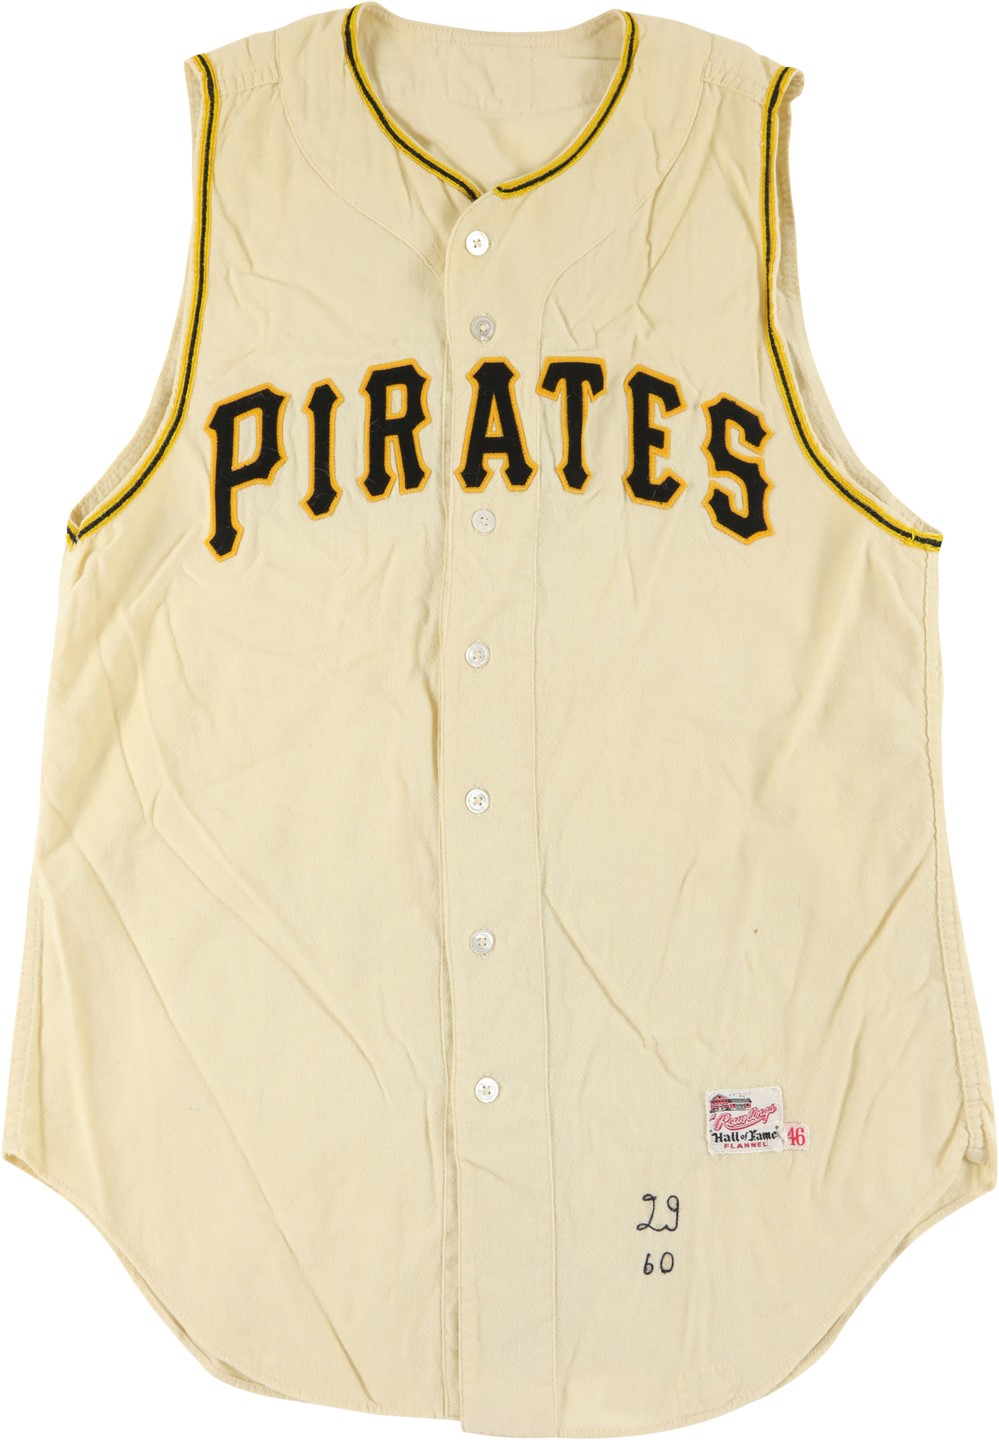 - 1960 Clem Labine and Others Pittsburgh Pirates Game Worn Jersey